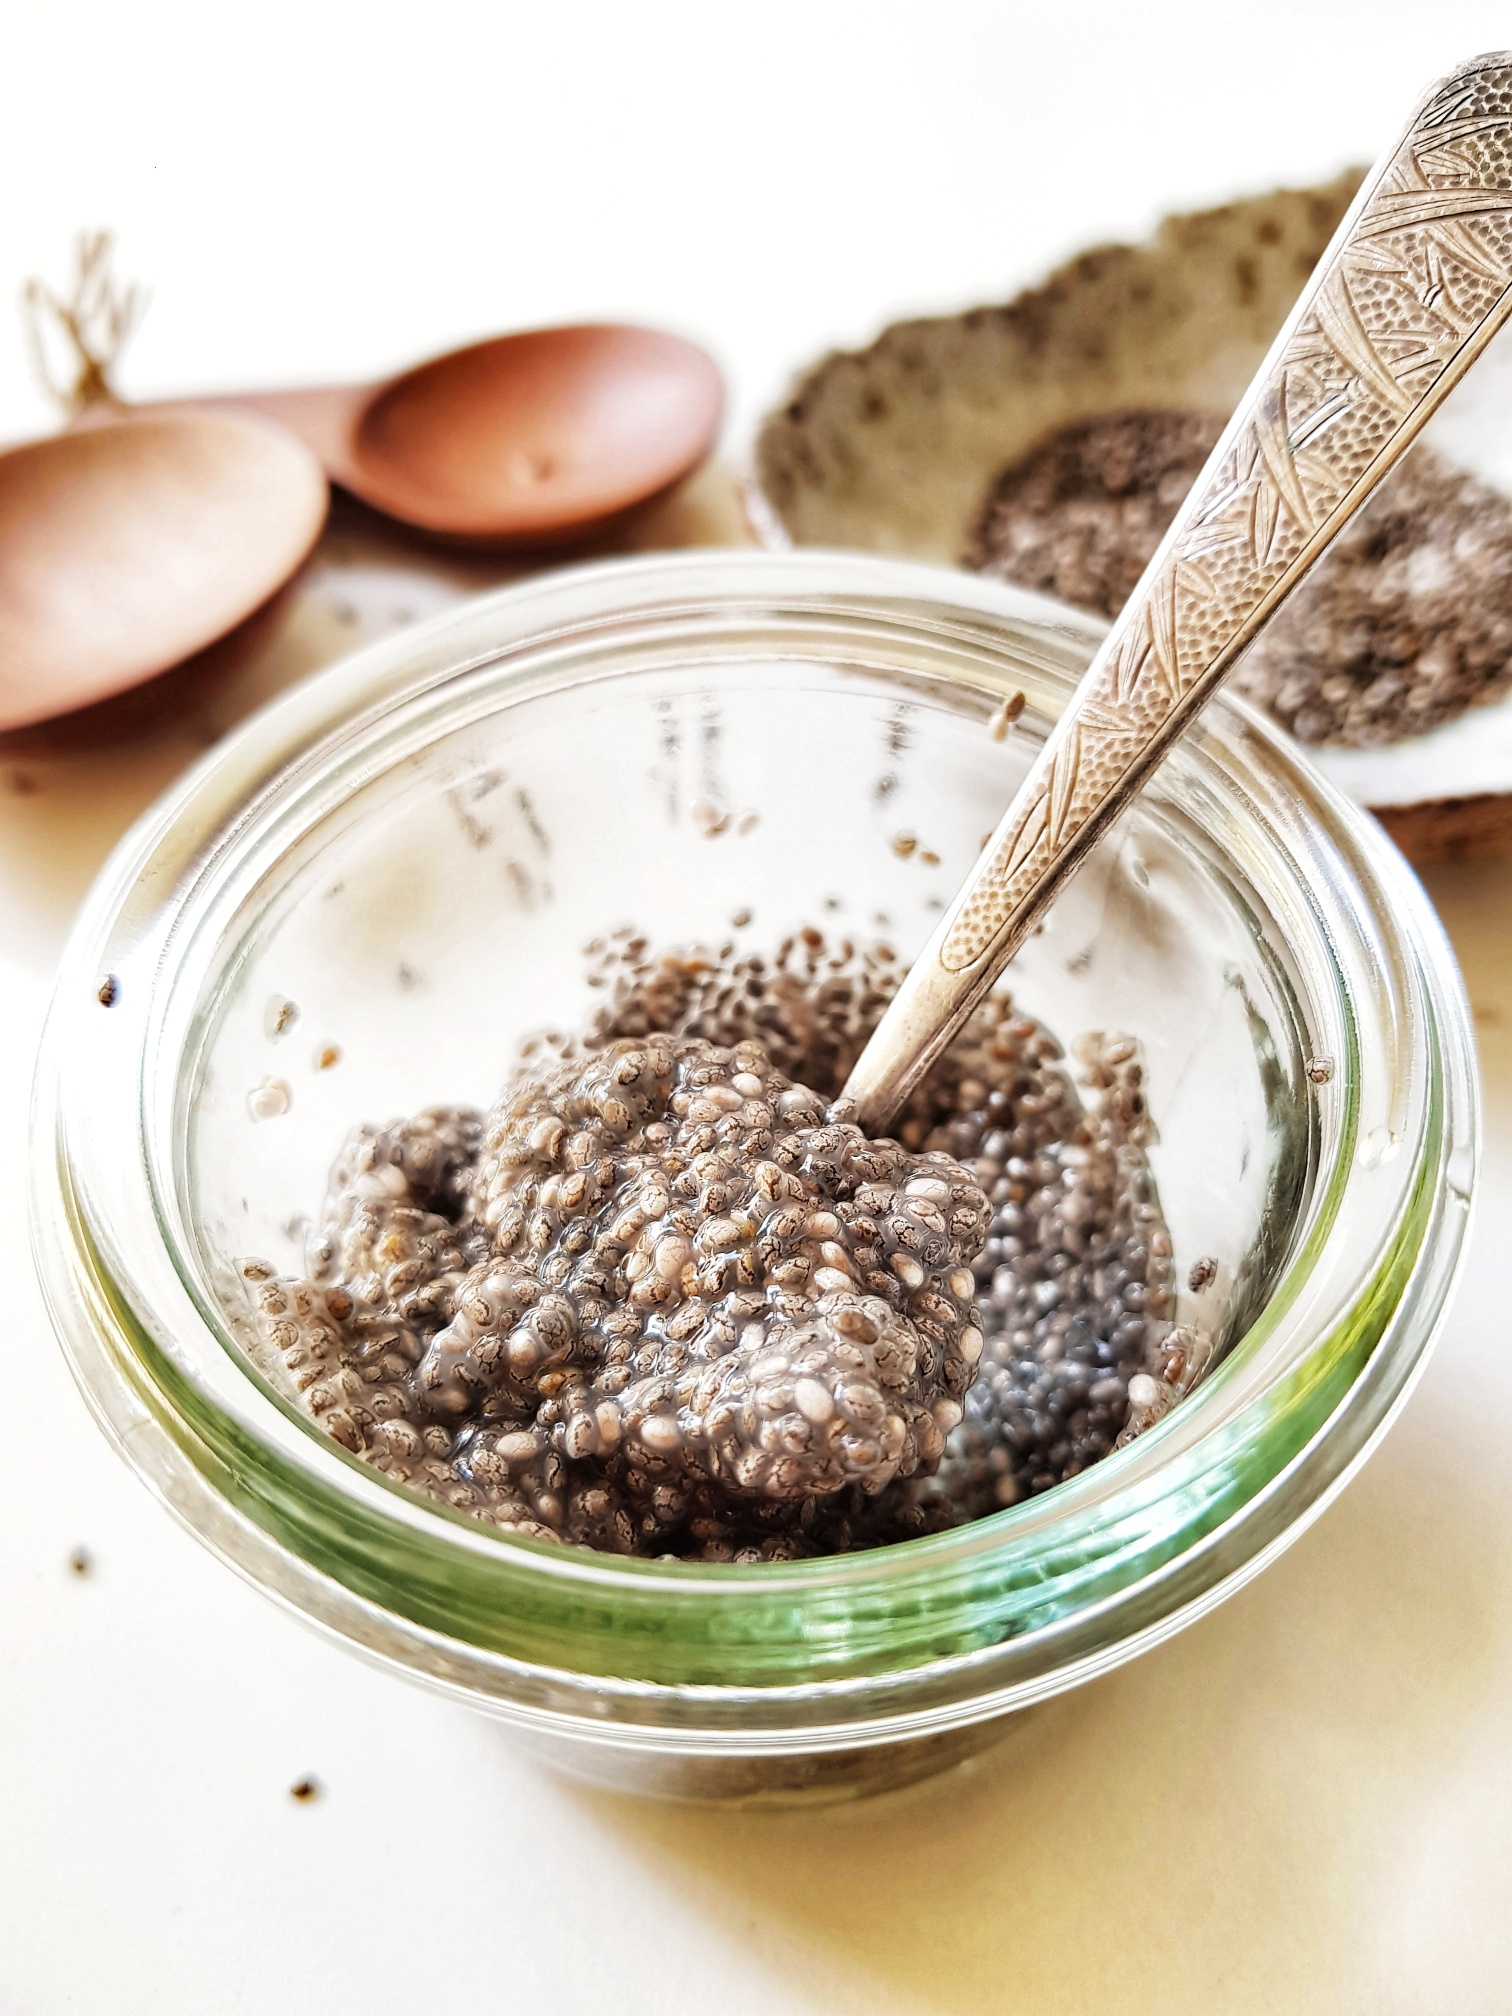 Healthy Flax or Chia Egg Recipe - Plant Proof